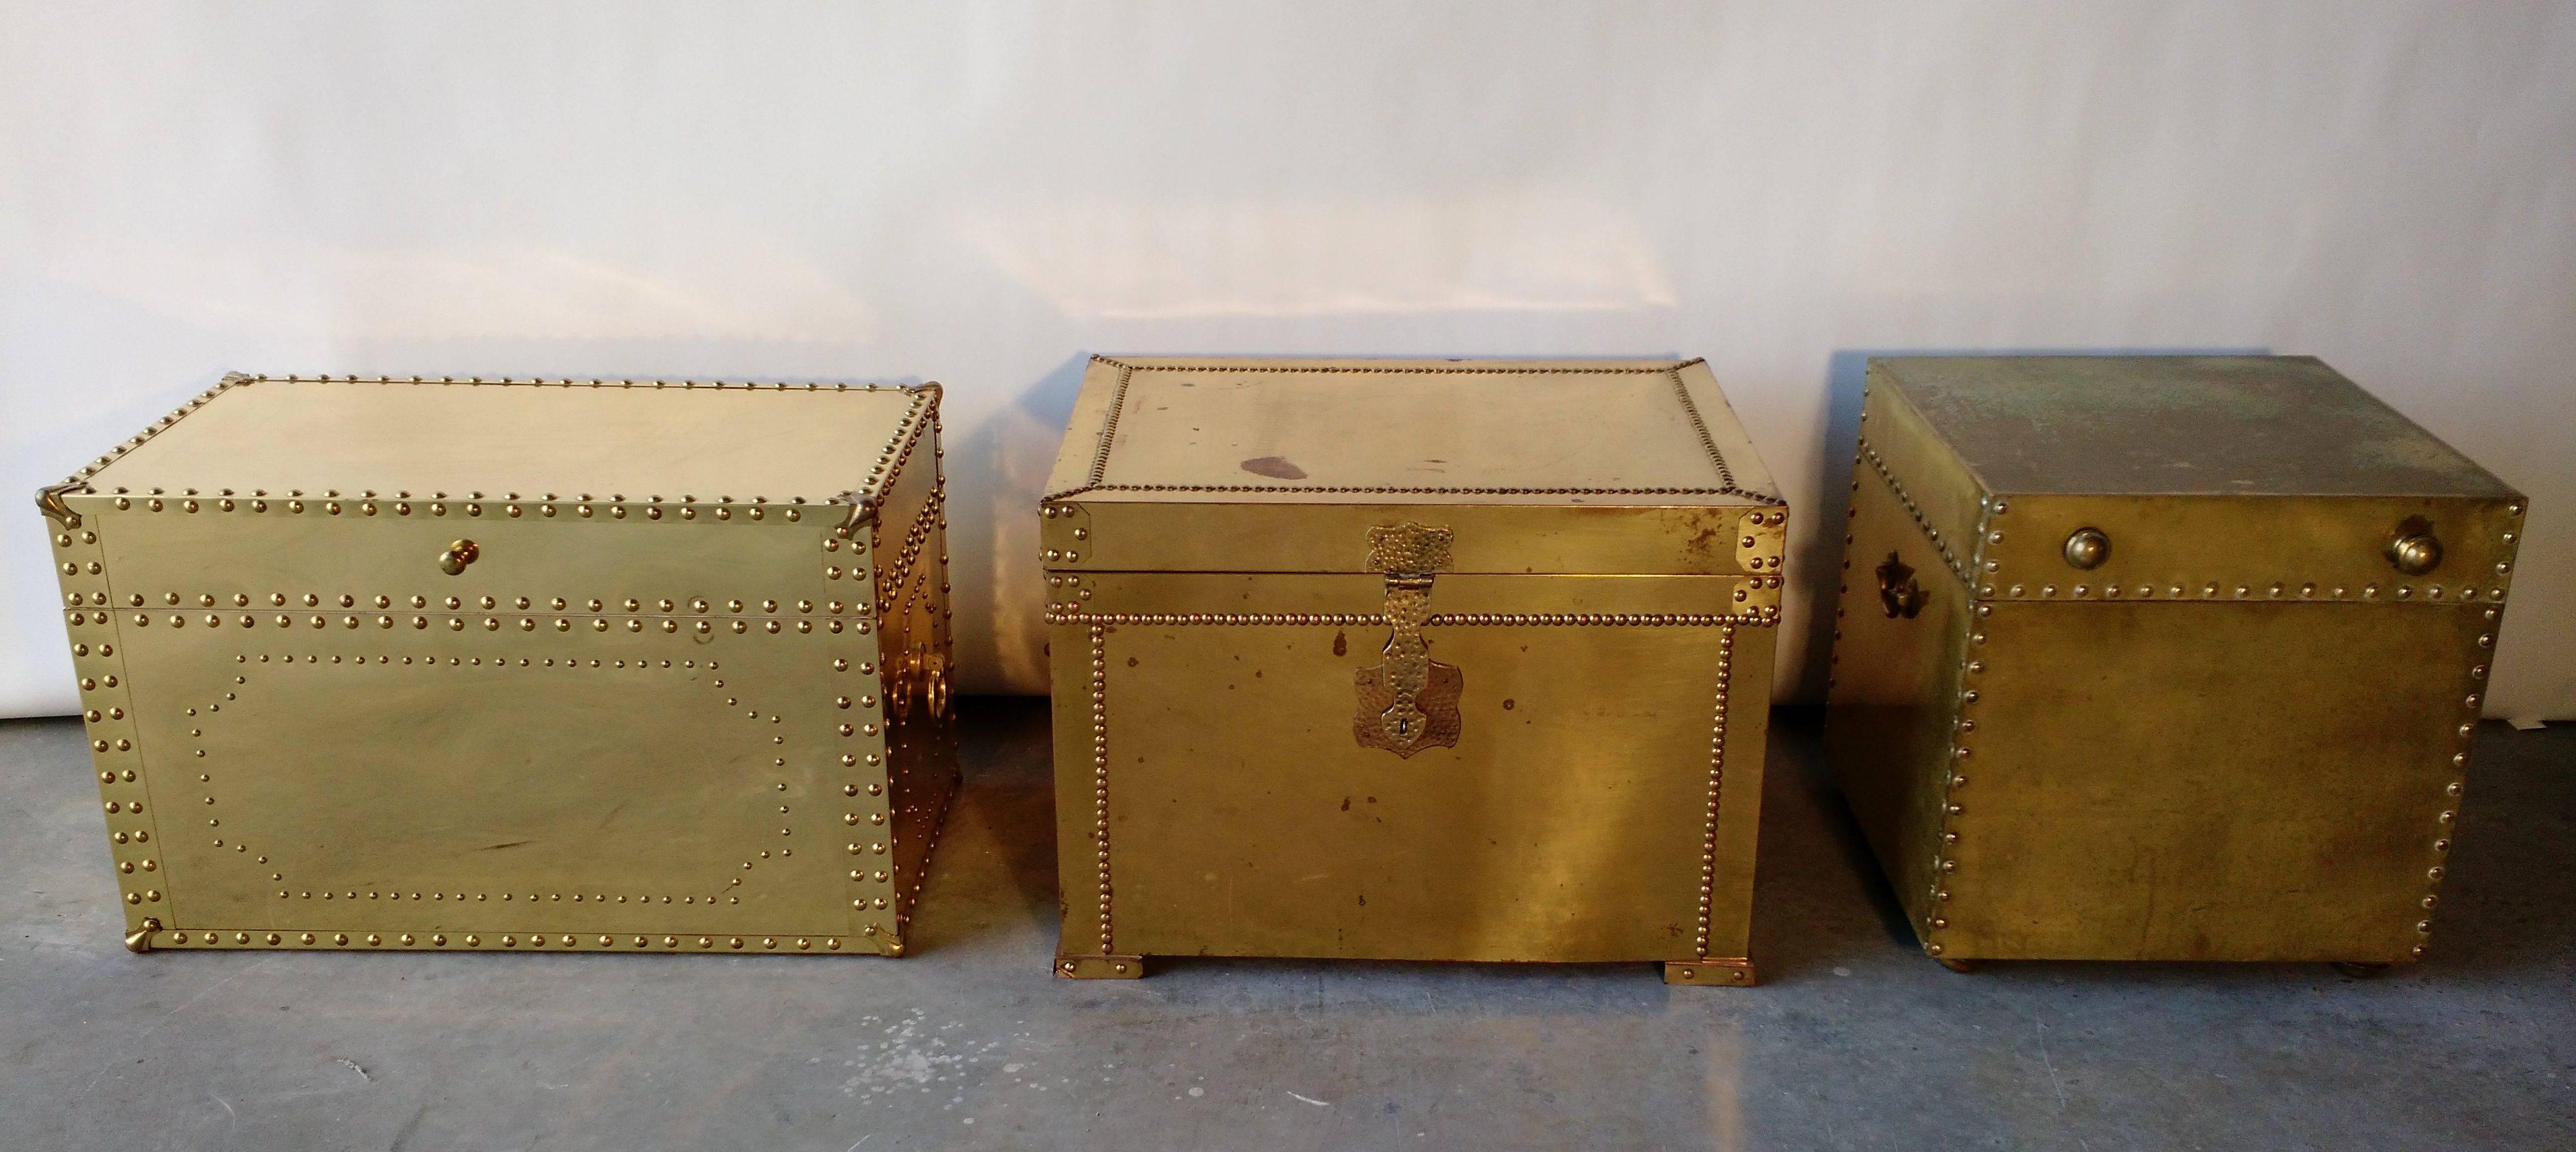 What's better than a stack of vintage brass clad nailhead trunks?
Perfect decor pieces. Could be lined up and used as a coffee table or side tables.
All three are vintage, circa 1970s or older. All nails, handles, feet, latches etc are in